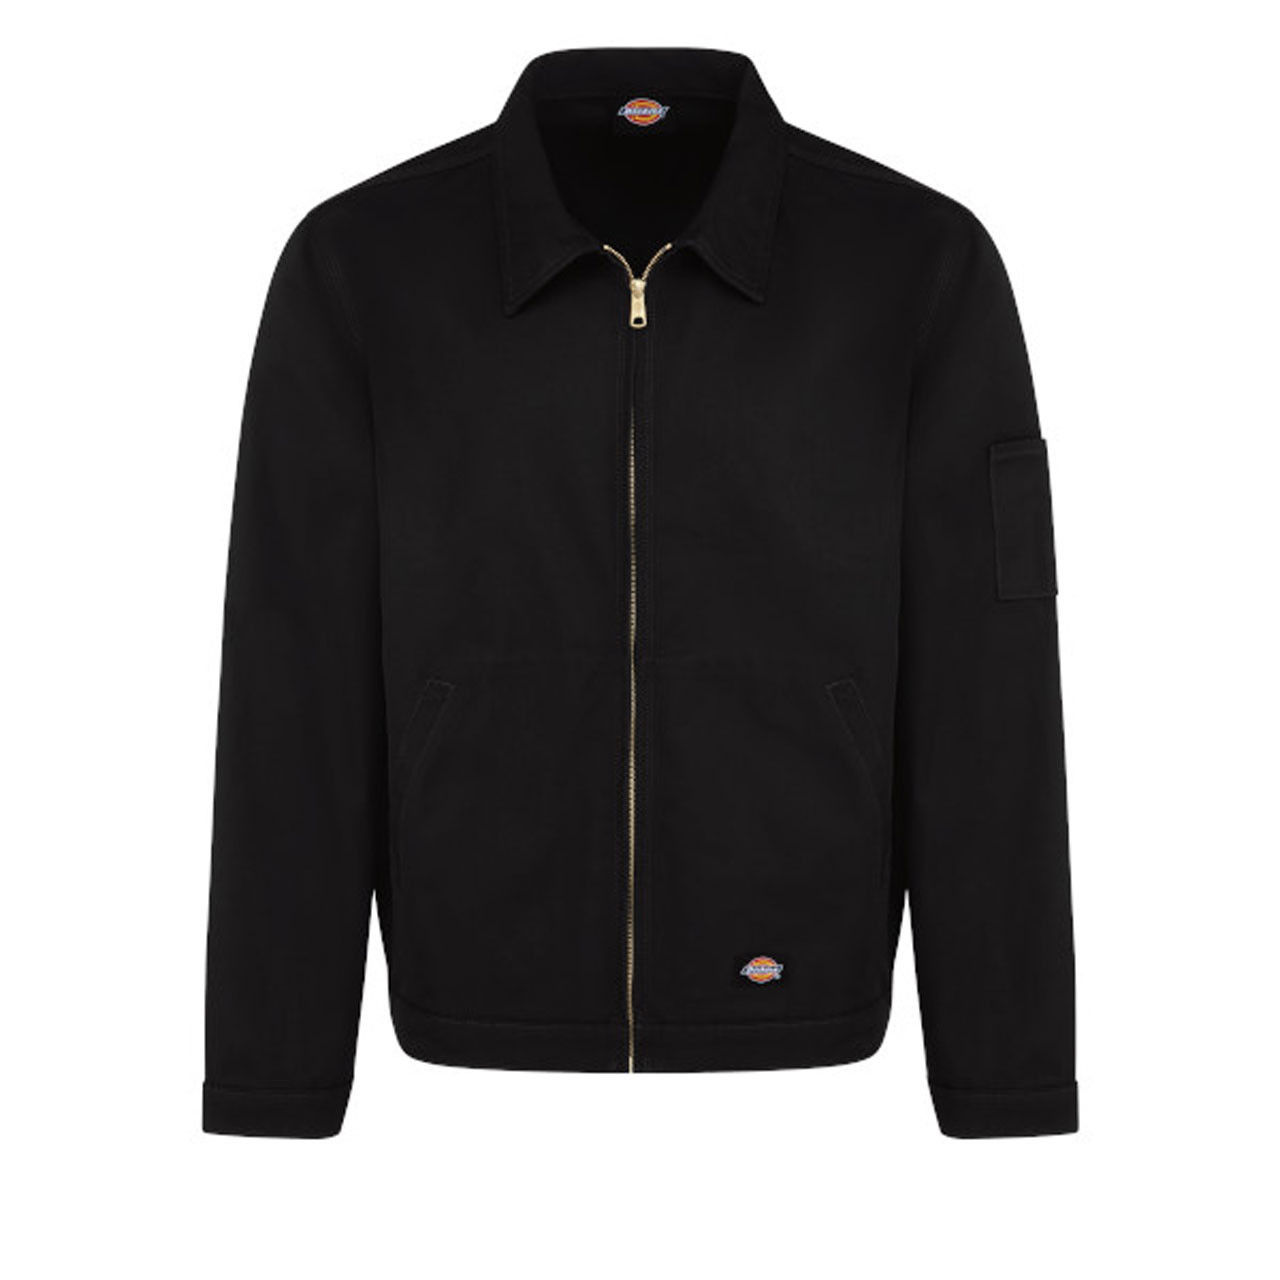 Is the Dickies Unlined Industrial Eisenhower Jacket suitable for both men and women?